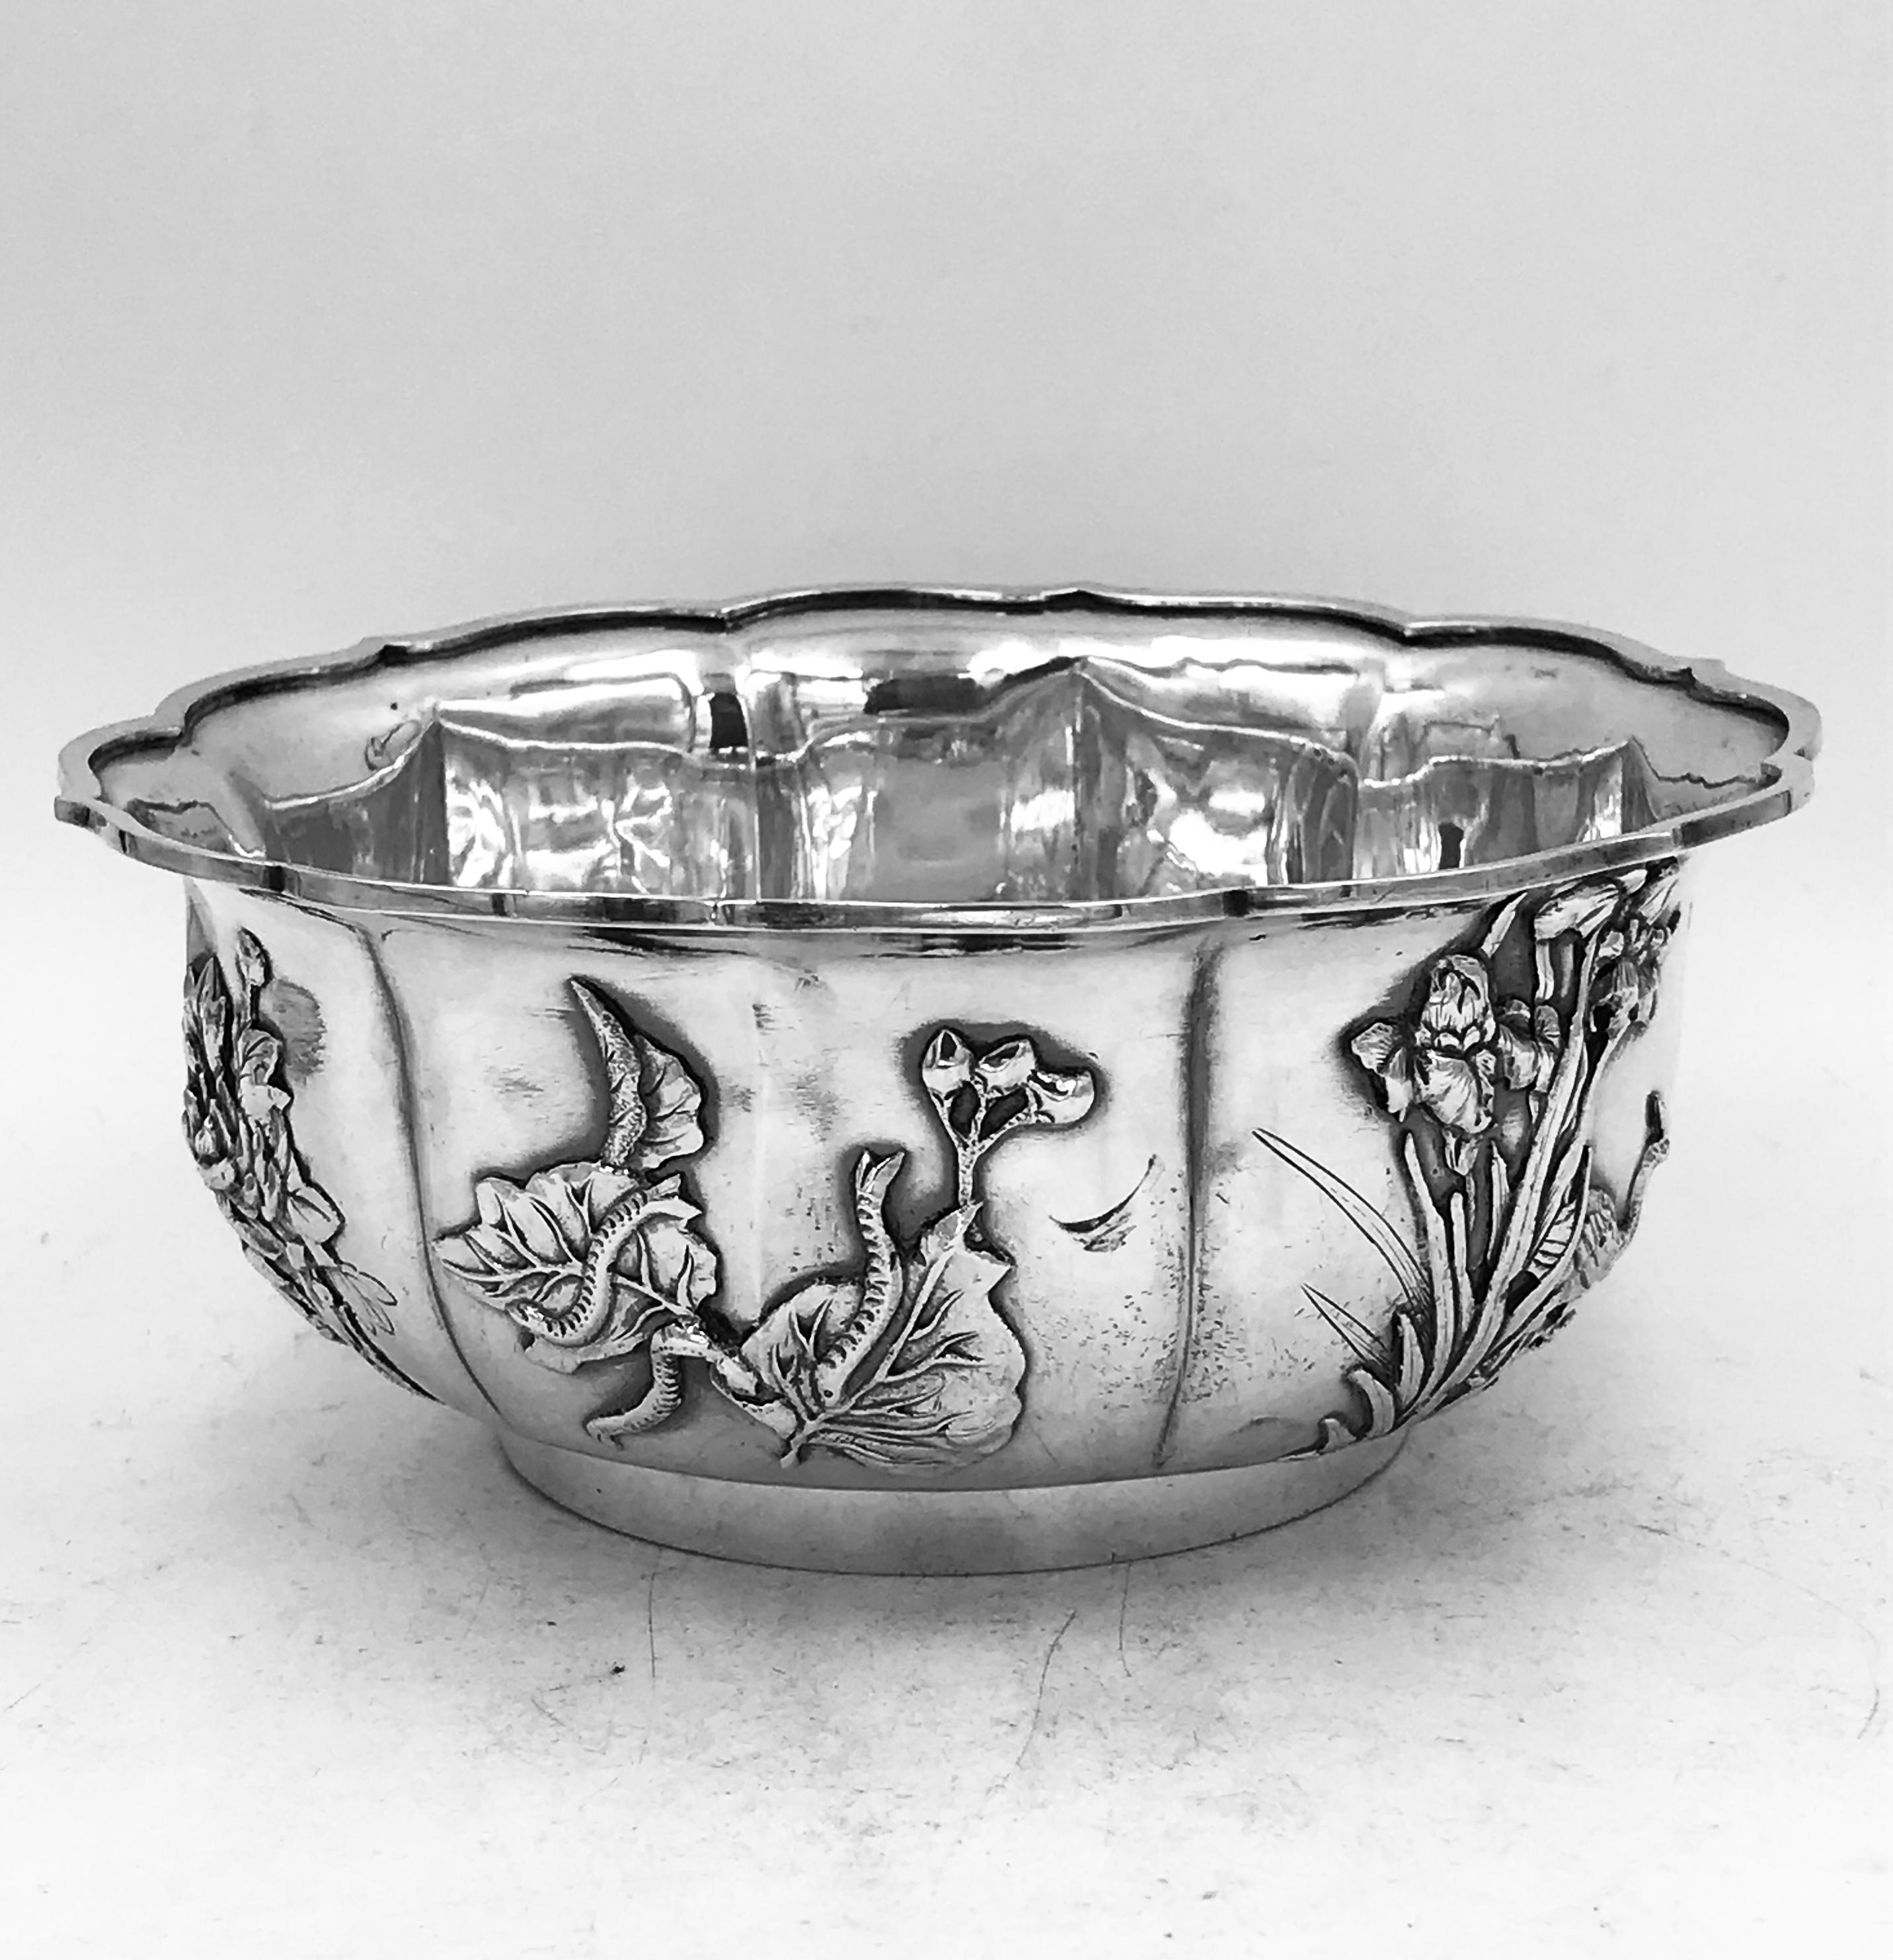 A Chinese silver bowl of lobed round form with applied decoration depicting various flowers and birds. It has the mark of TS for the shop of Tien Shing or Tin Sang, which was based in Hong Kong in the late 19th century. This bowl dates from circa